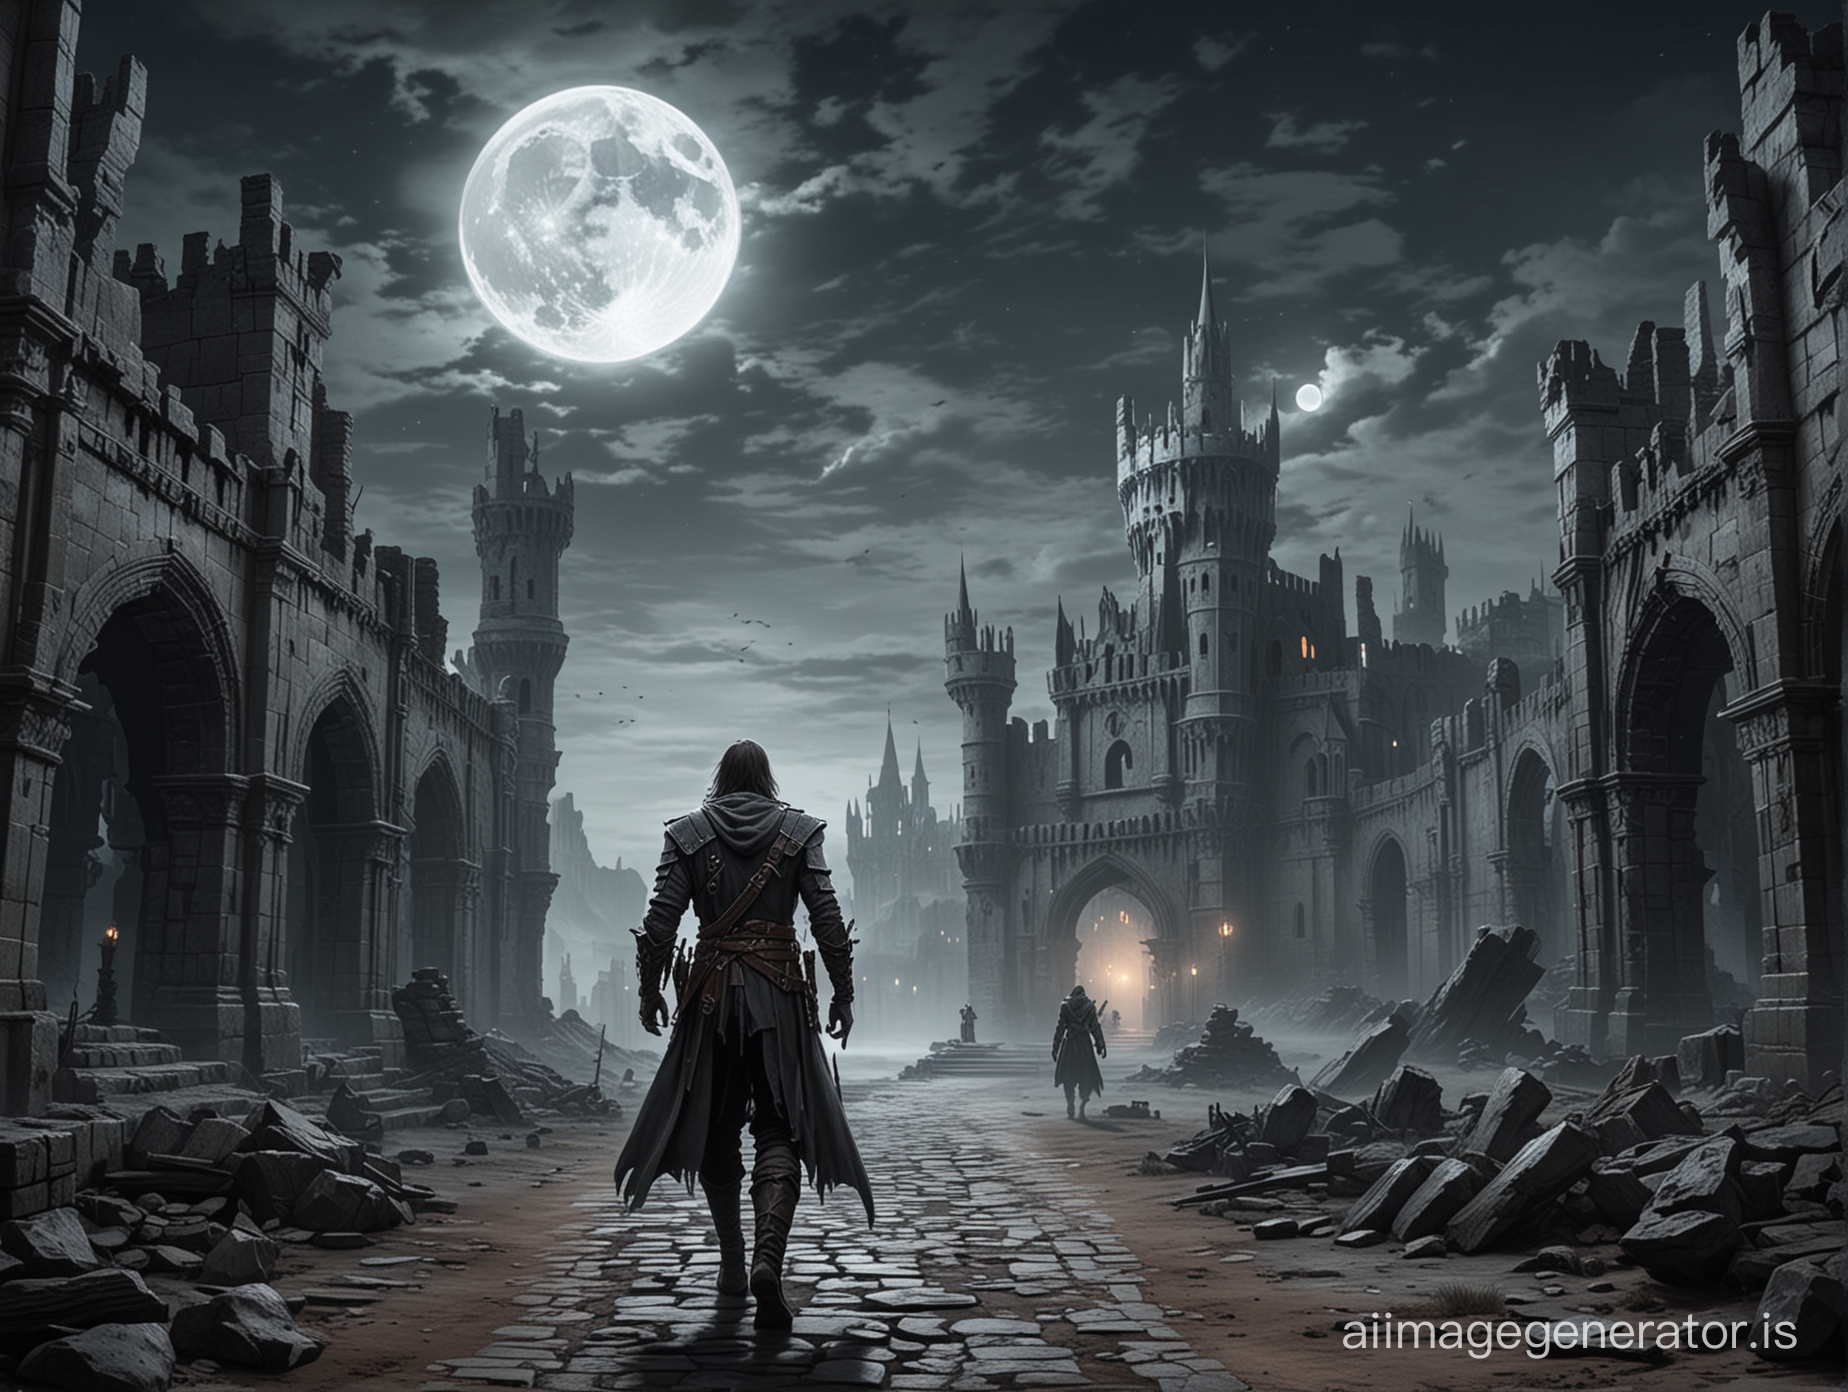 Castlevania inspired man in gray ashen rags, walking through the courtyard of a ruined castle under a full moon